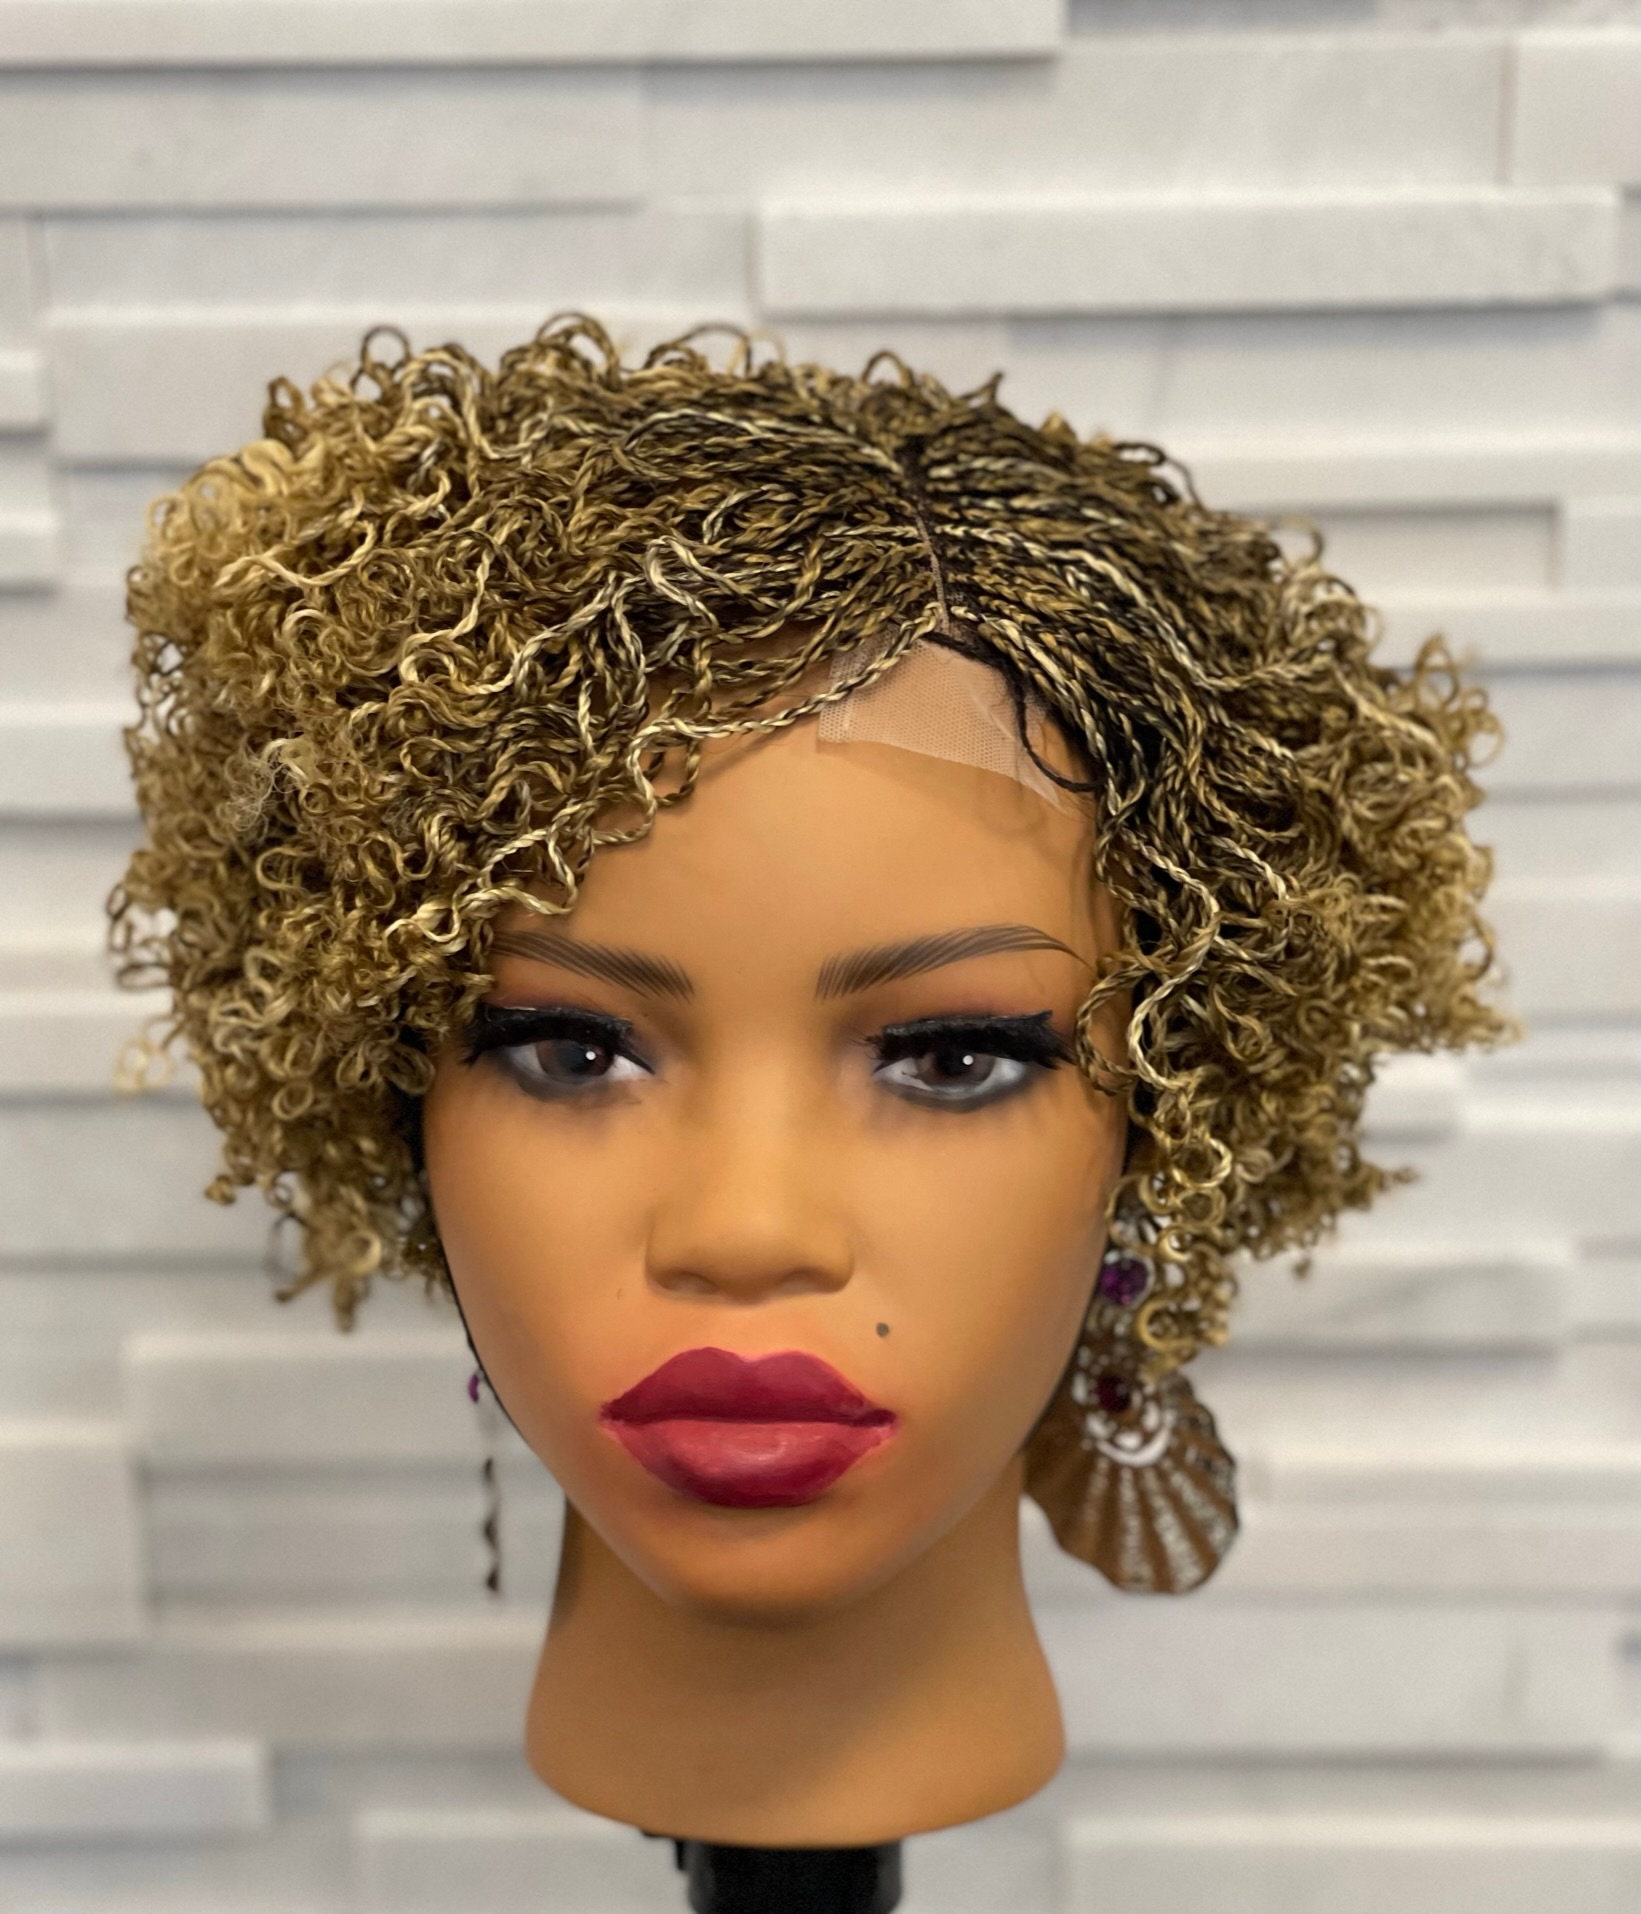 Bald Mannequin Head Brown Female Professional Cosmetology For Wig Making,  Display Wigs, Eyeglasses, Hairs With T Pins 21